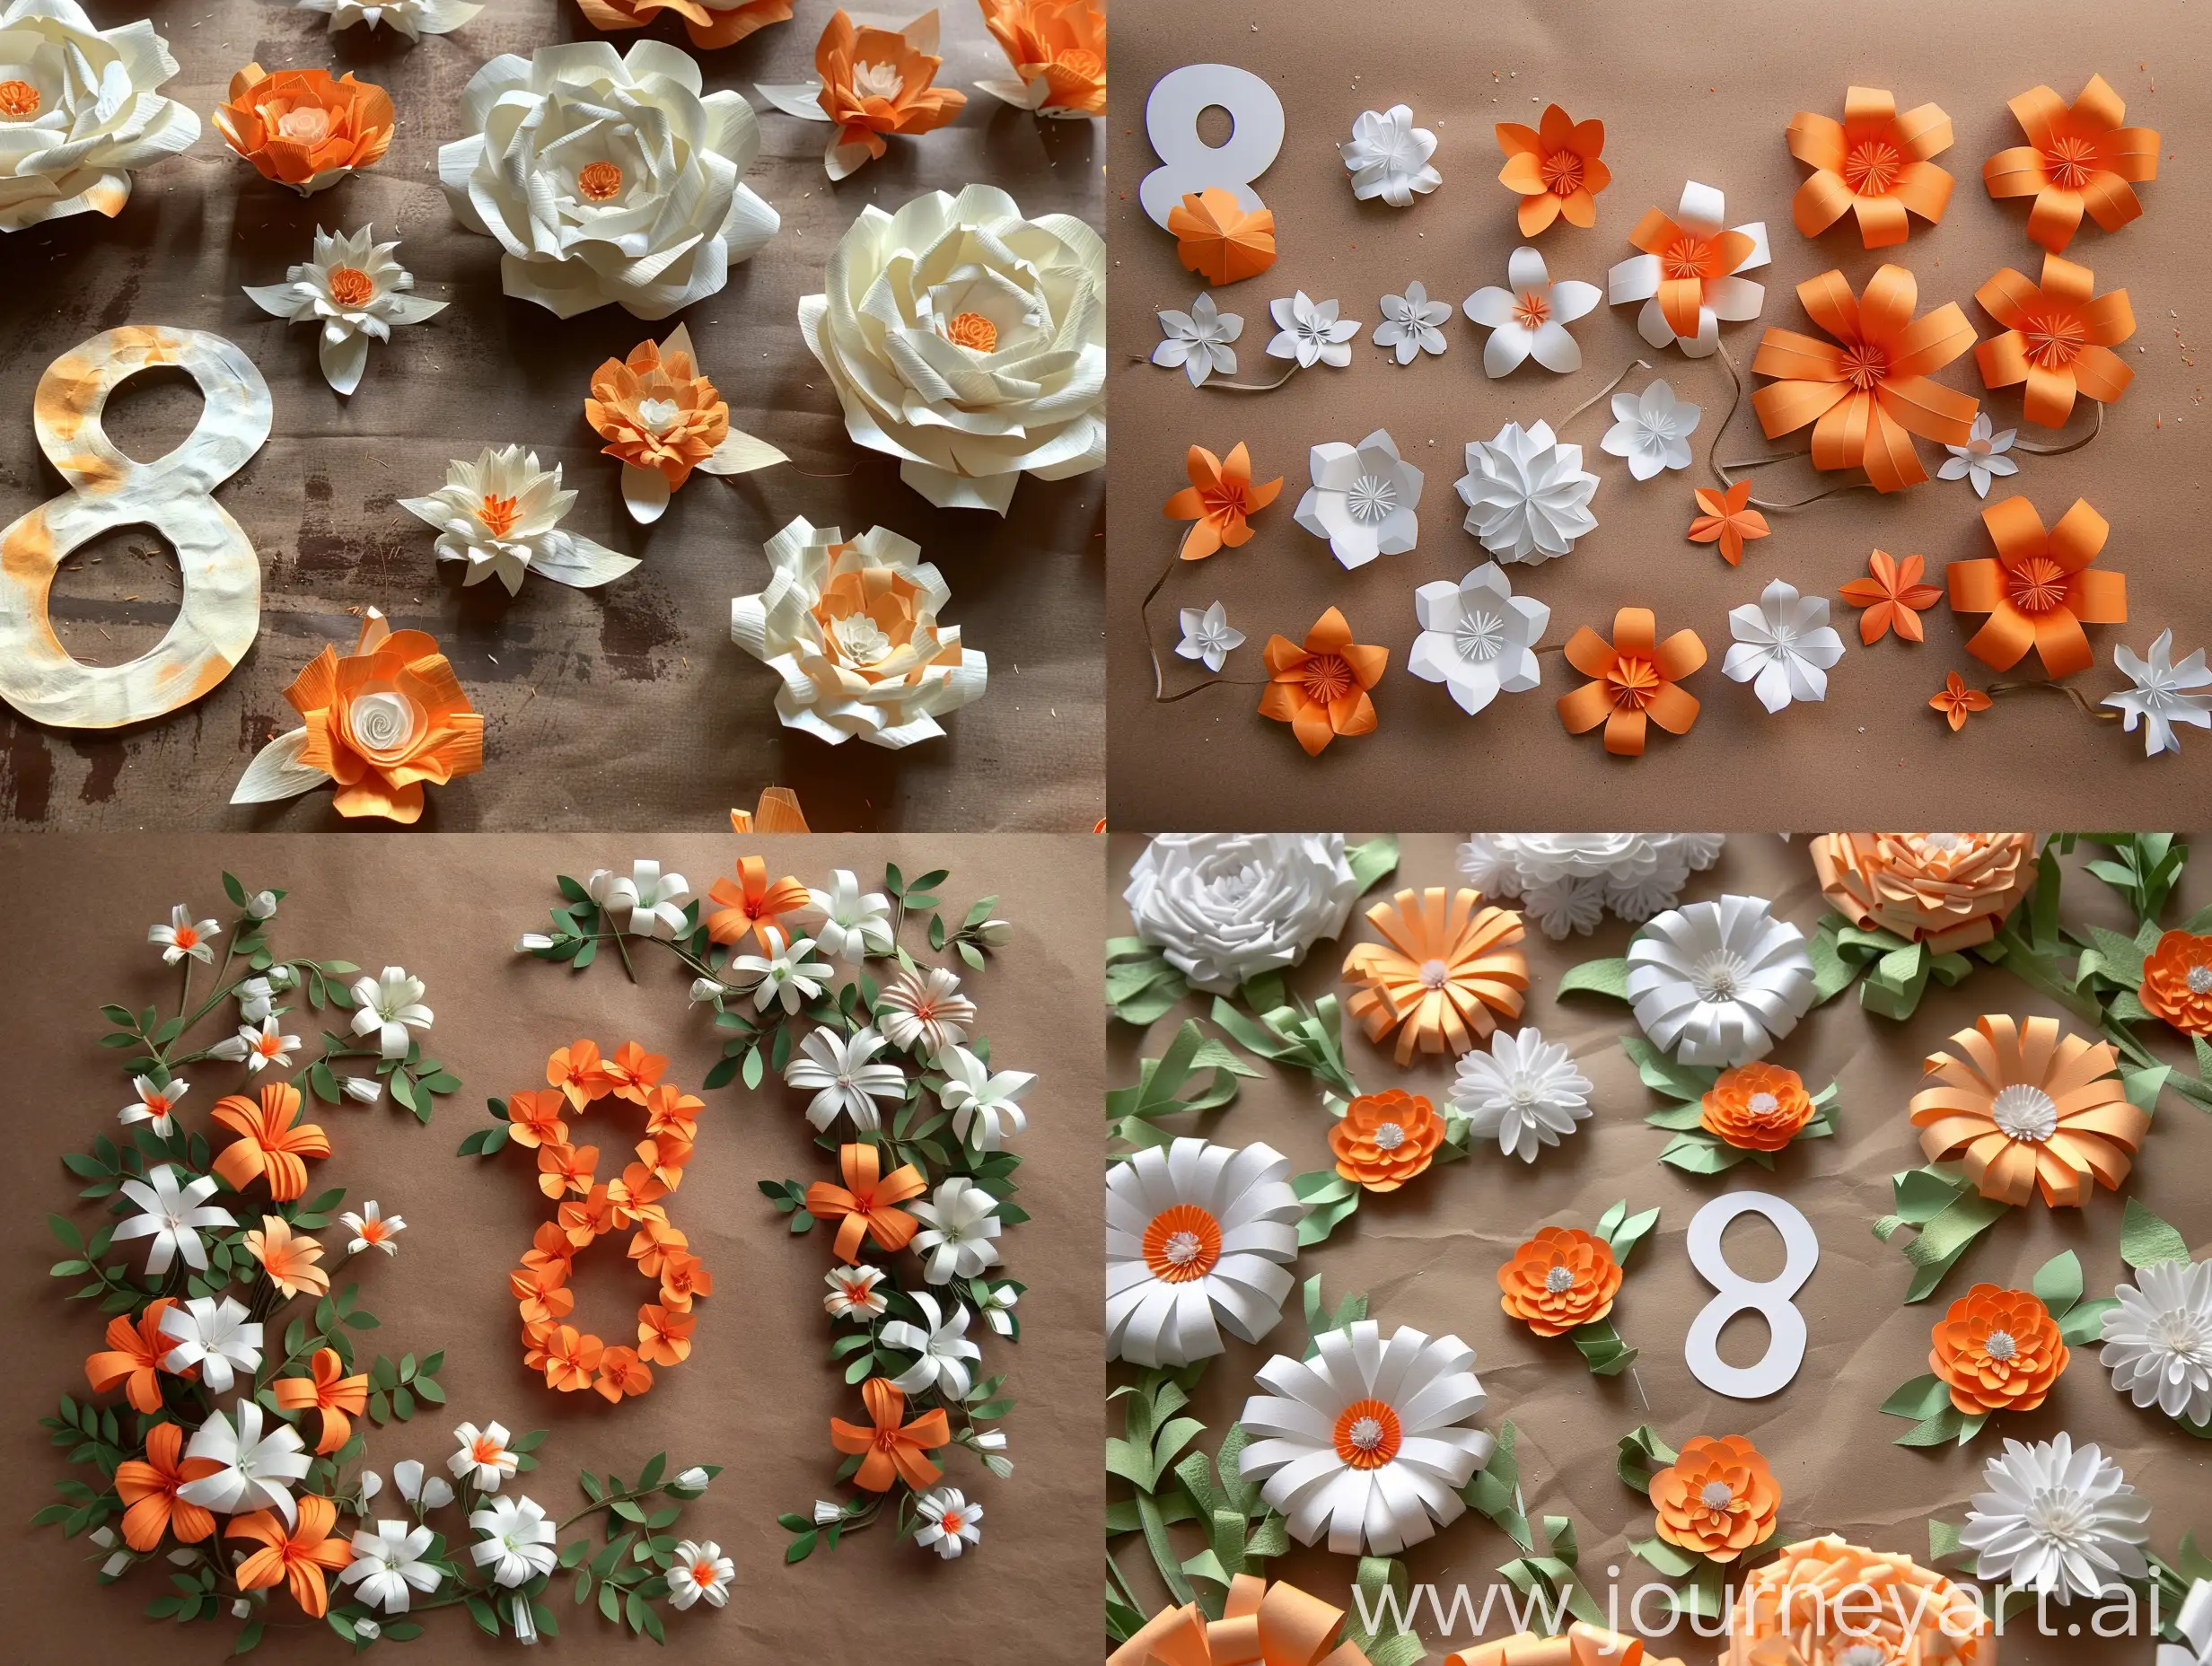 number 8 and orange and white flowers made of paper lay on the brown table